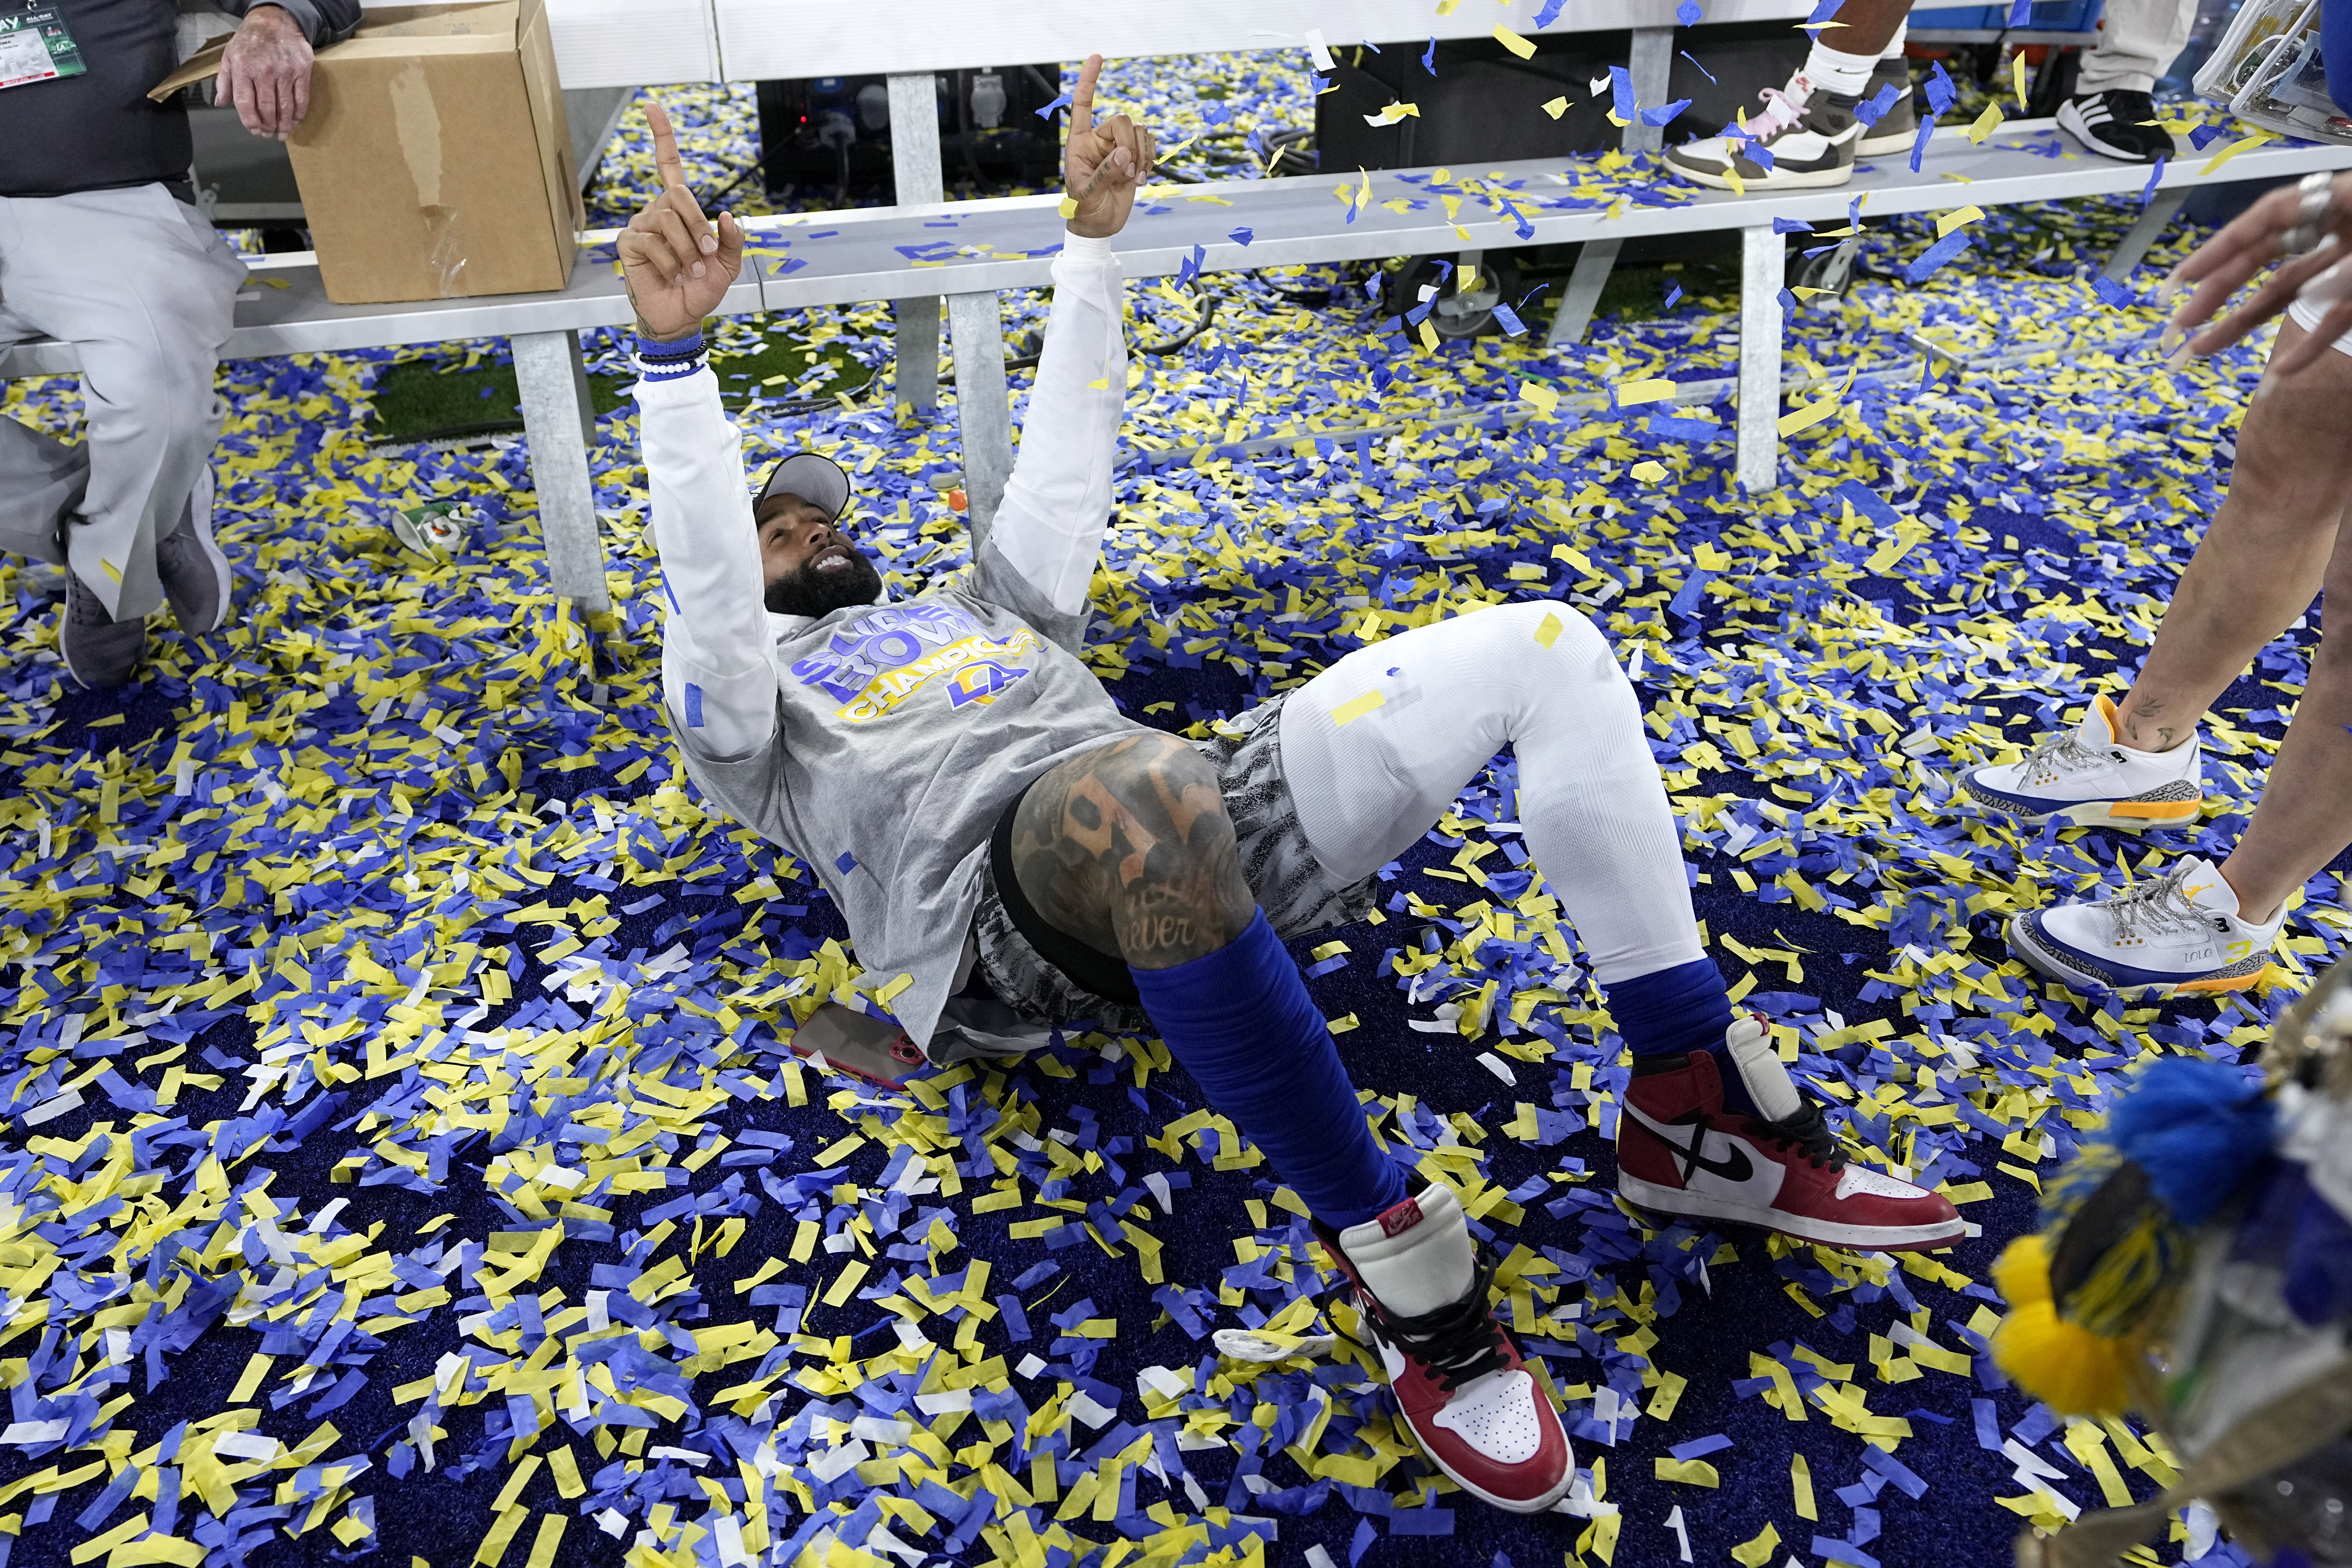 Emotional Odell Beckham Jr. cries after winning Super Bowl 56 with Rams:  'This was exactly God's plan